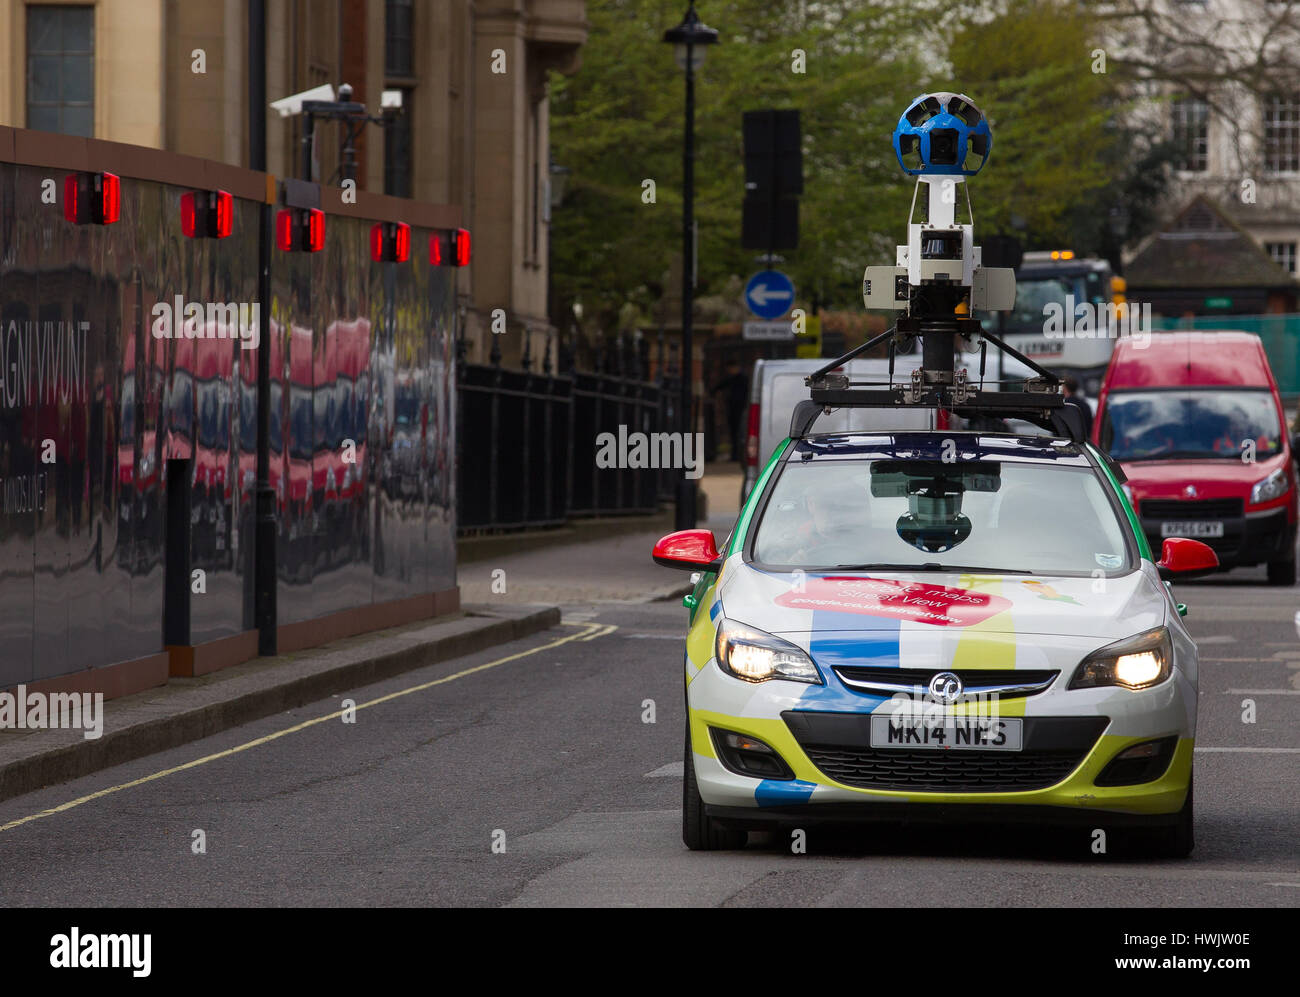 Google Street View Car  Pictured: A Google Street view Vauxhall Astra car captures the streets of London  Jamie Lorriman mail@jamielorriman.co.uk www. Stock Photo